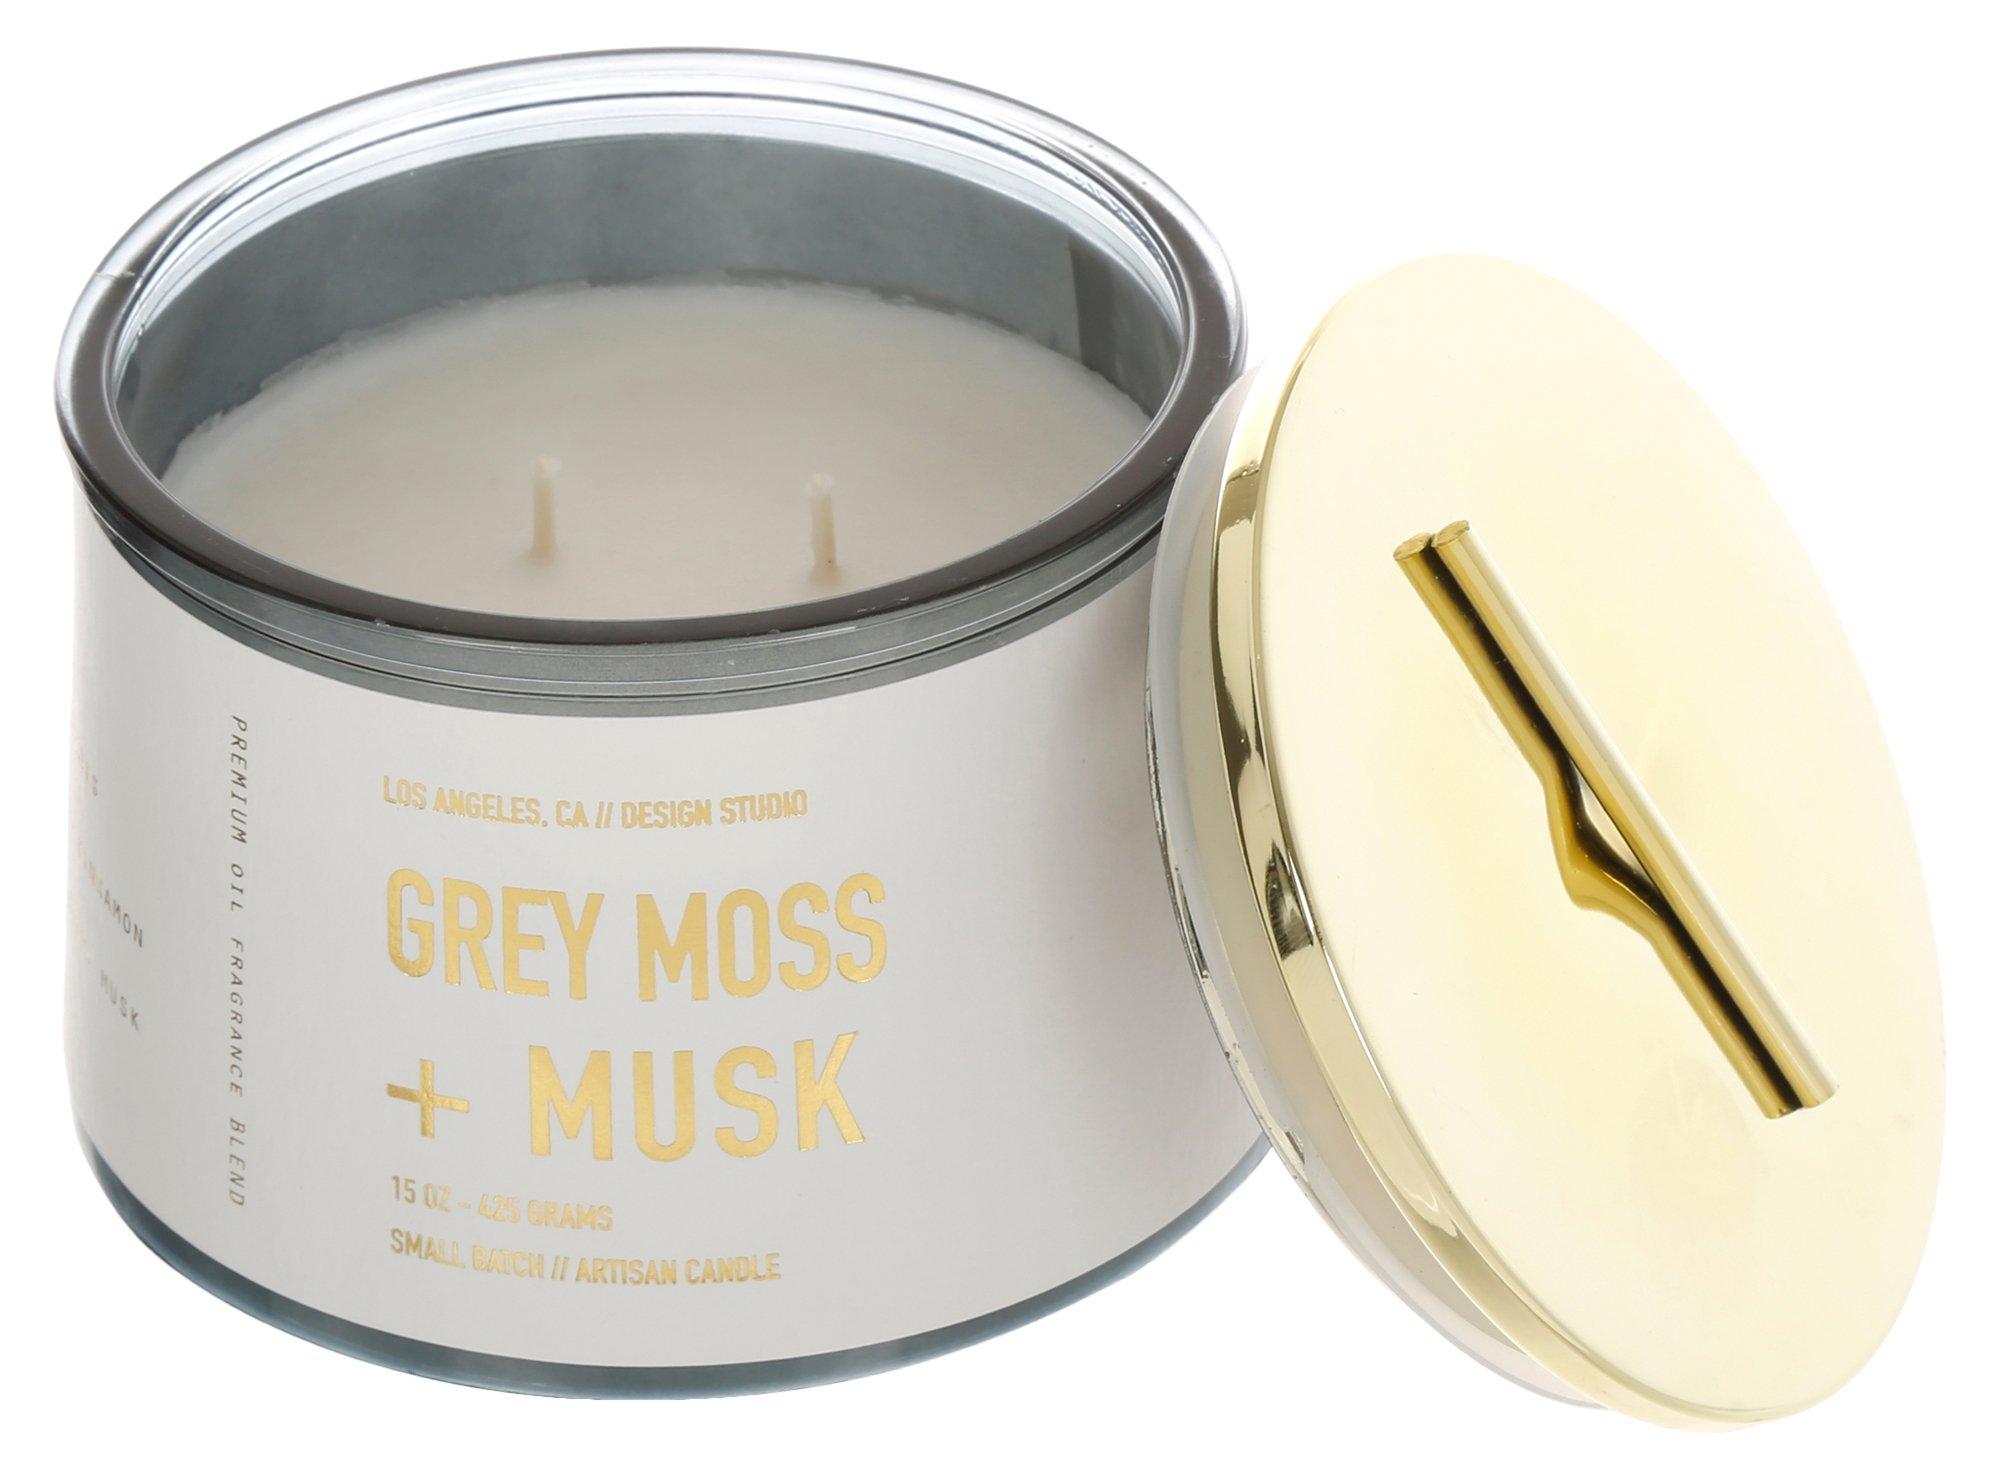 15 oz Grey Moss and Musk Scented Candle